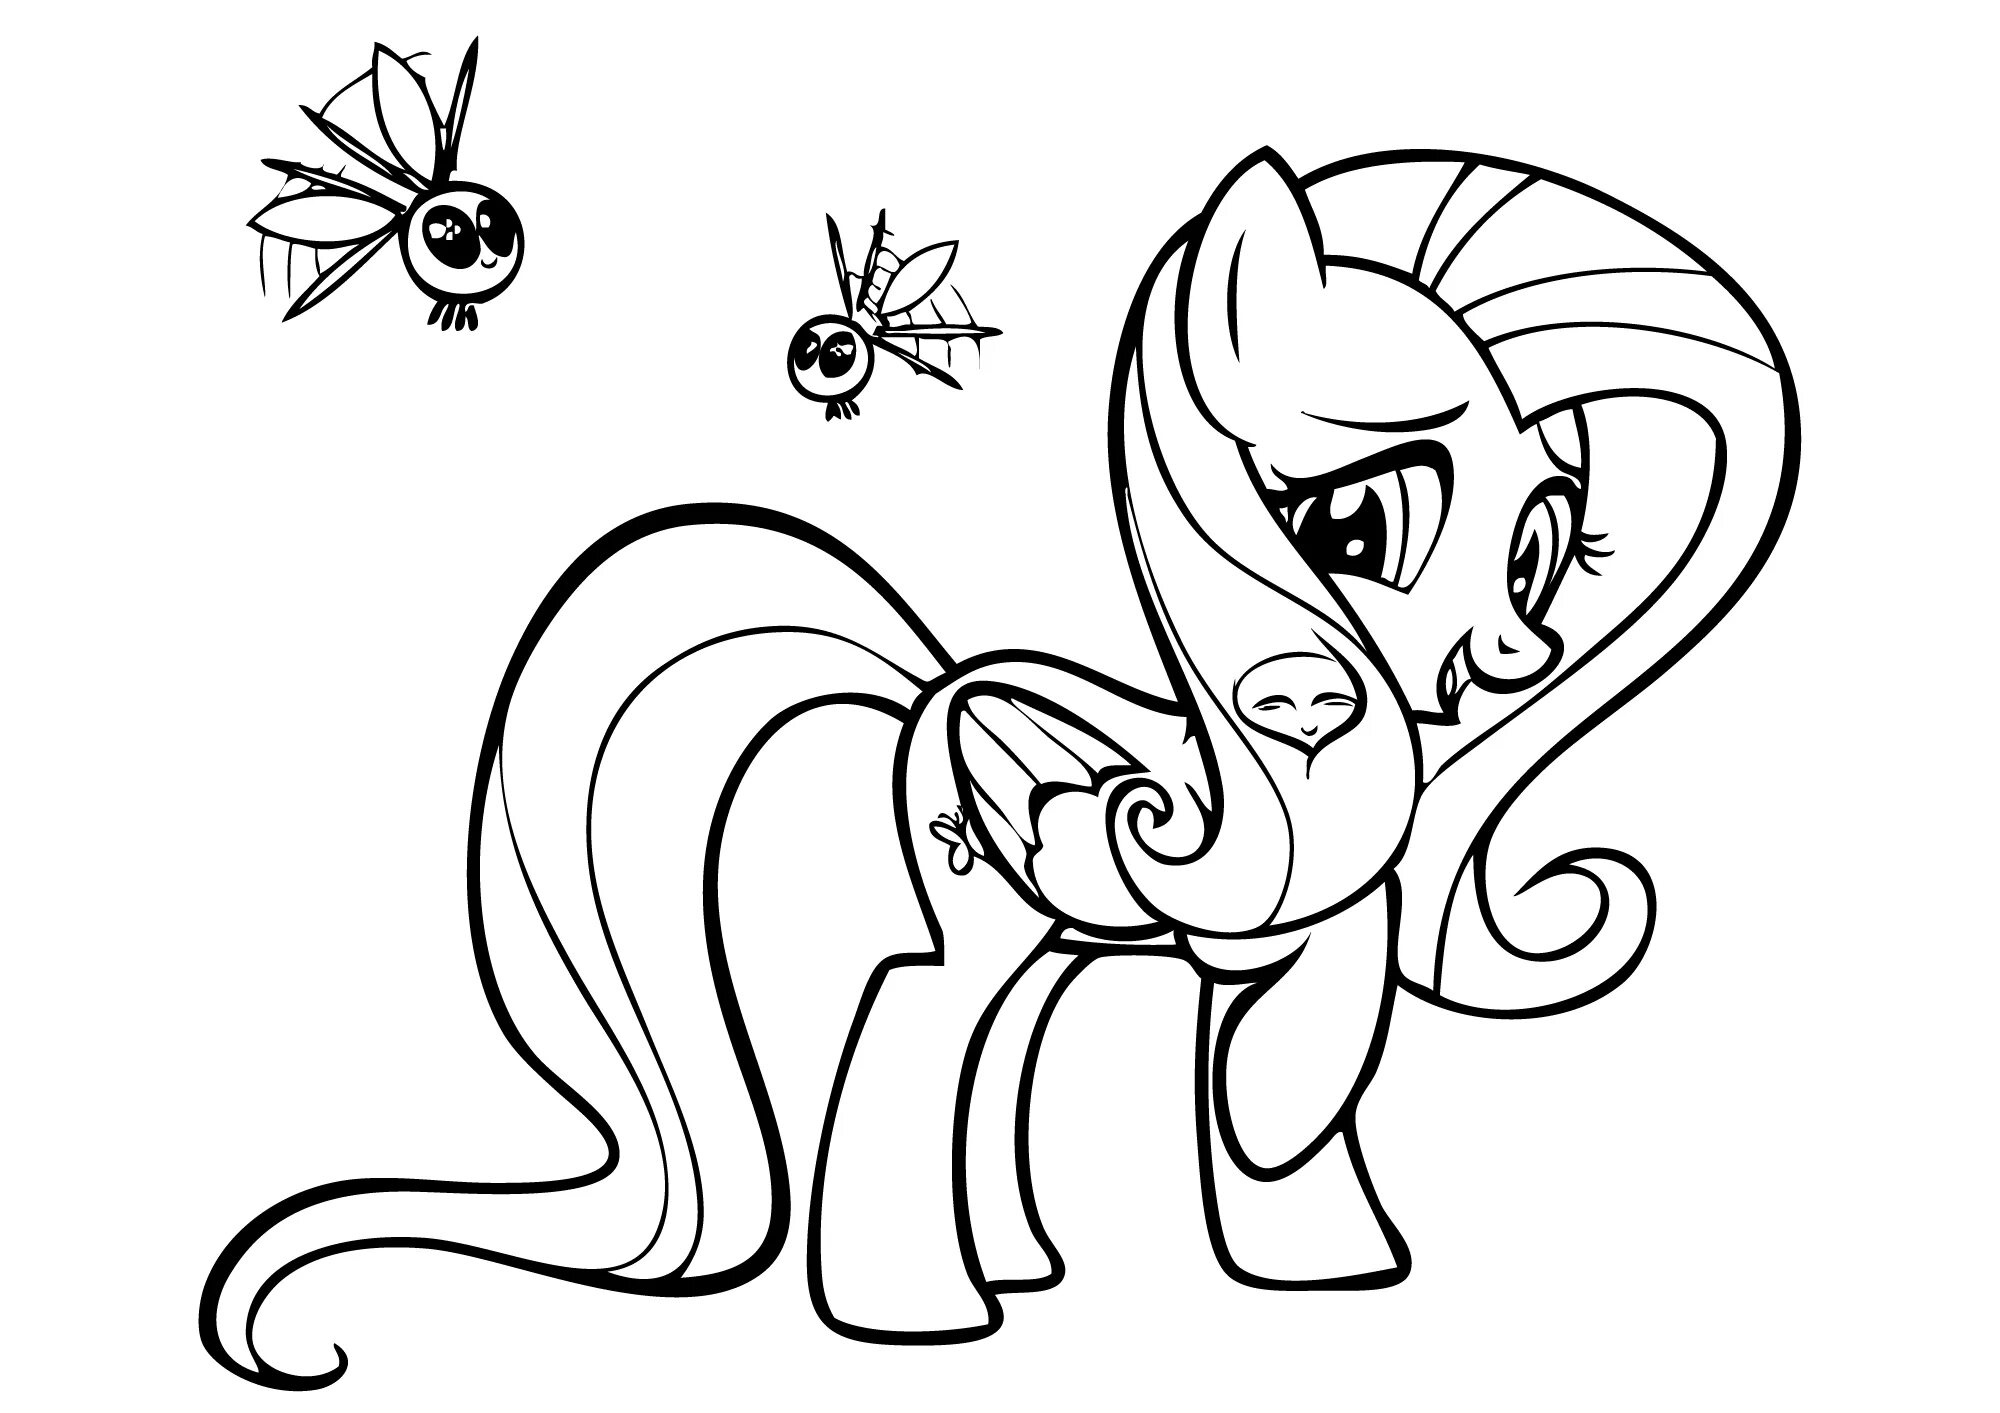 Coloring page energetic little pony for kids